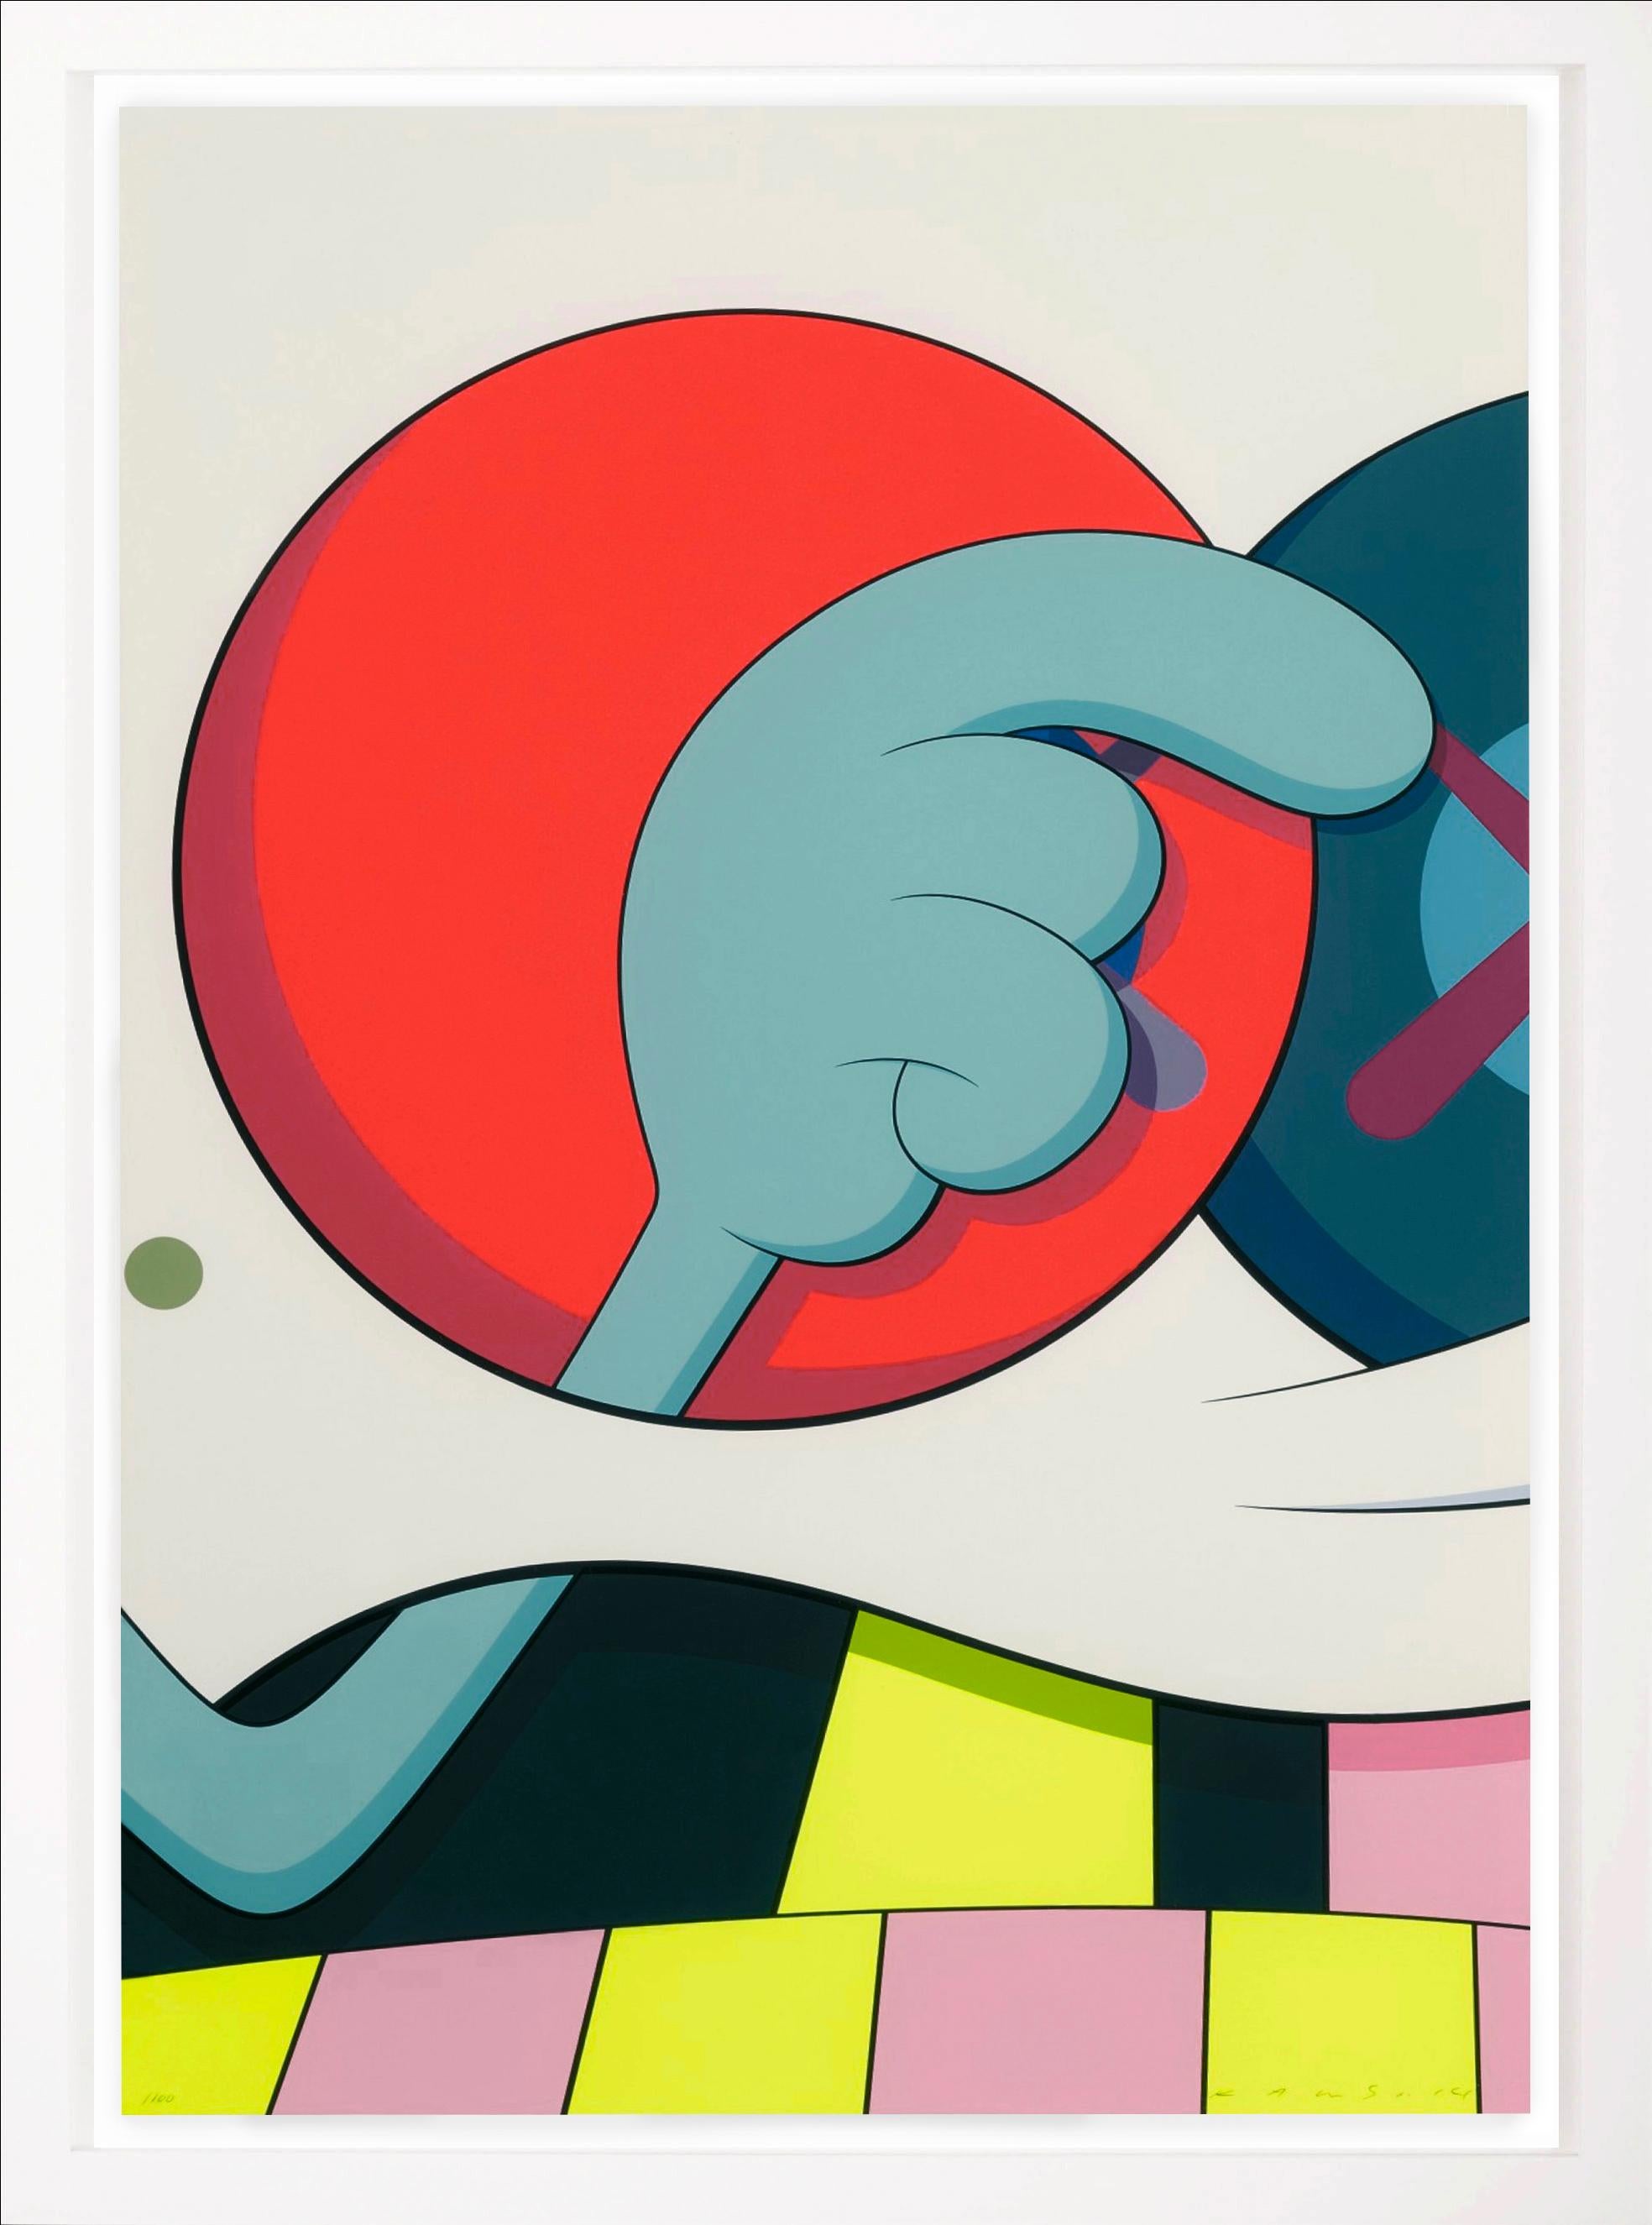 The ‘Blame Game' I by KAWS is an exceptionally rare screenprint, one of the ten in the portfolio series created in 2014. A completely new, individual, brightly colored screenprint signed and numbered by the artist. The portfolio was created in a